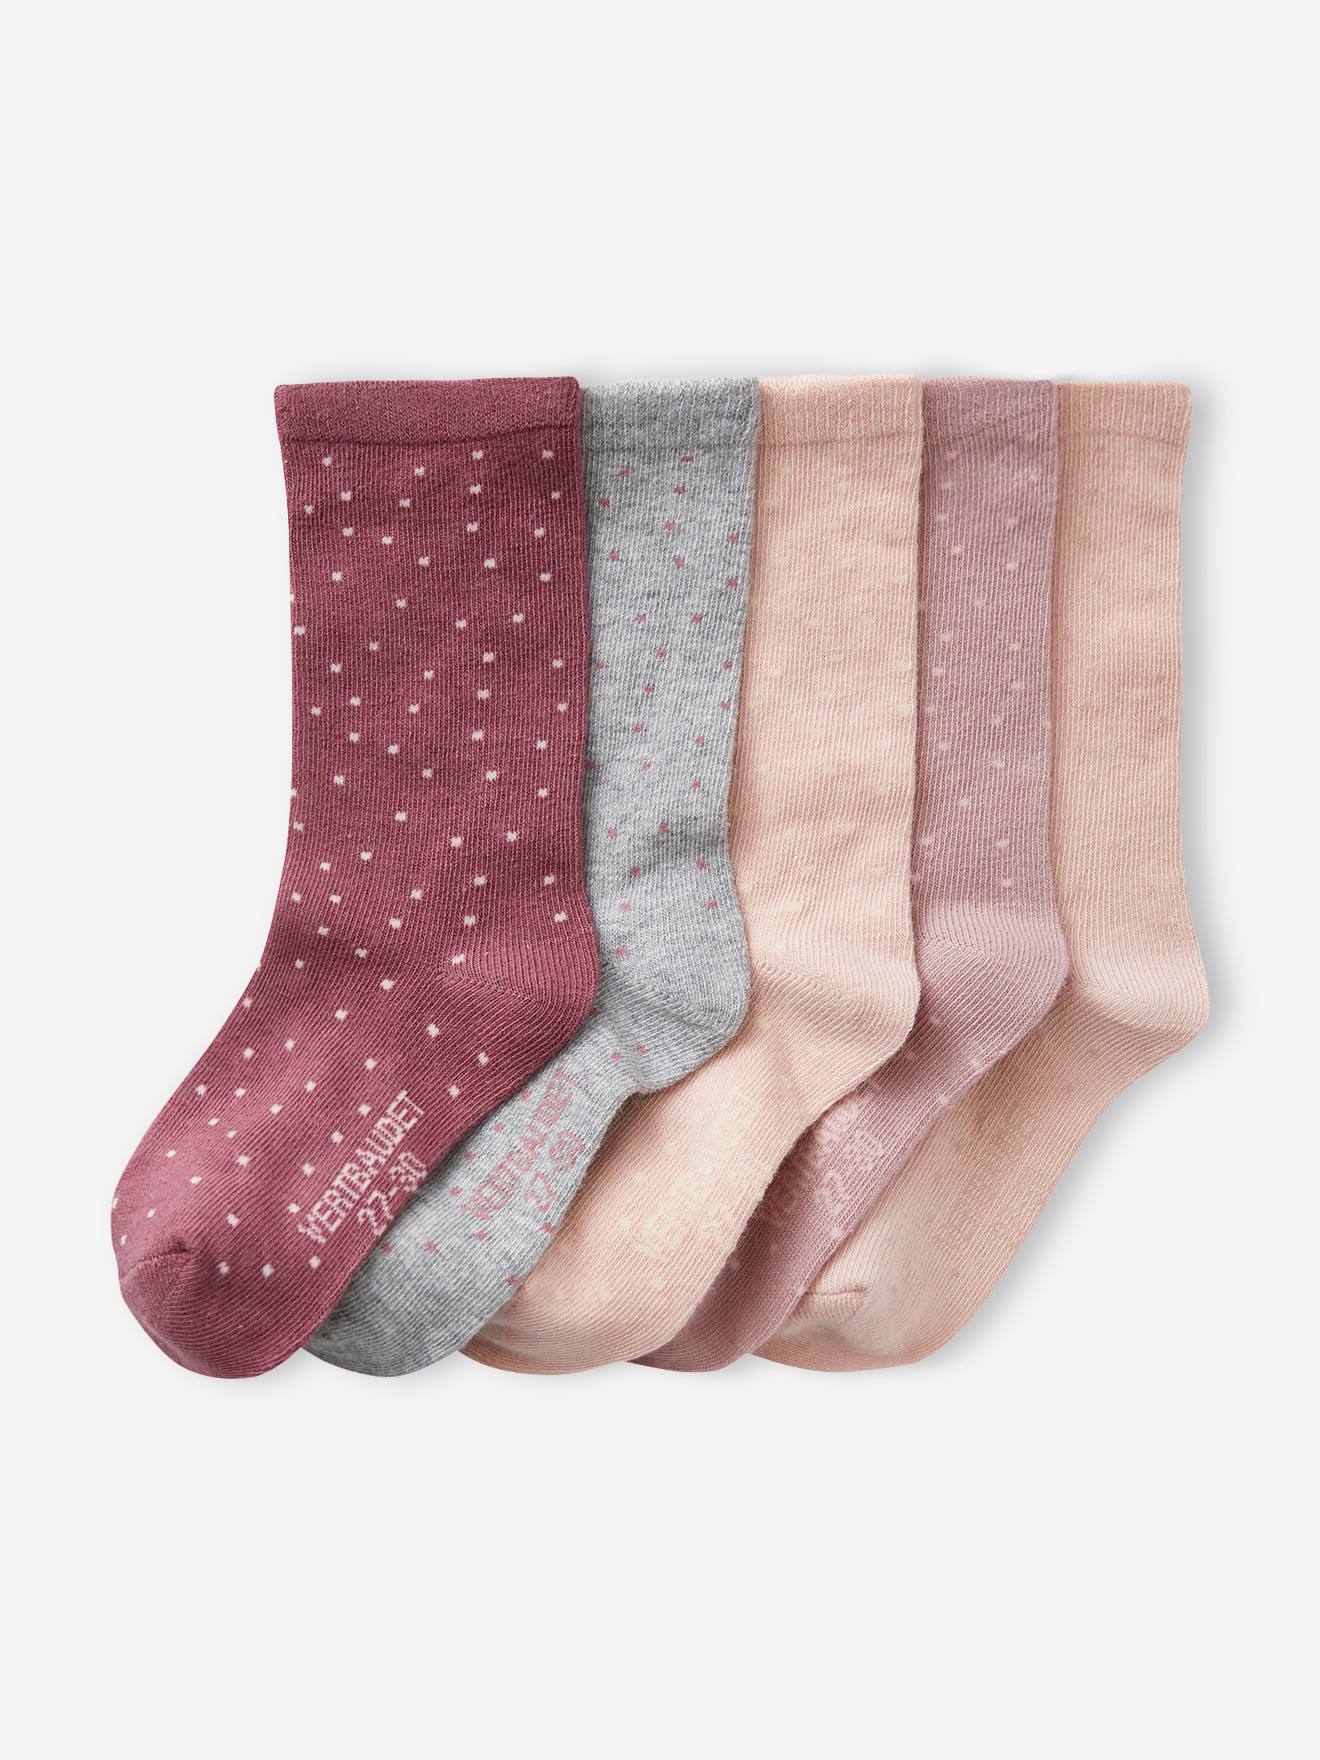 Pack of 5 Pairs of Dotted Socks for Girls old rose